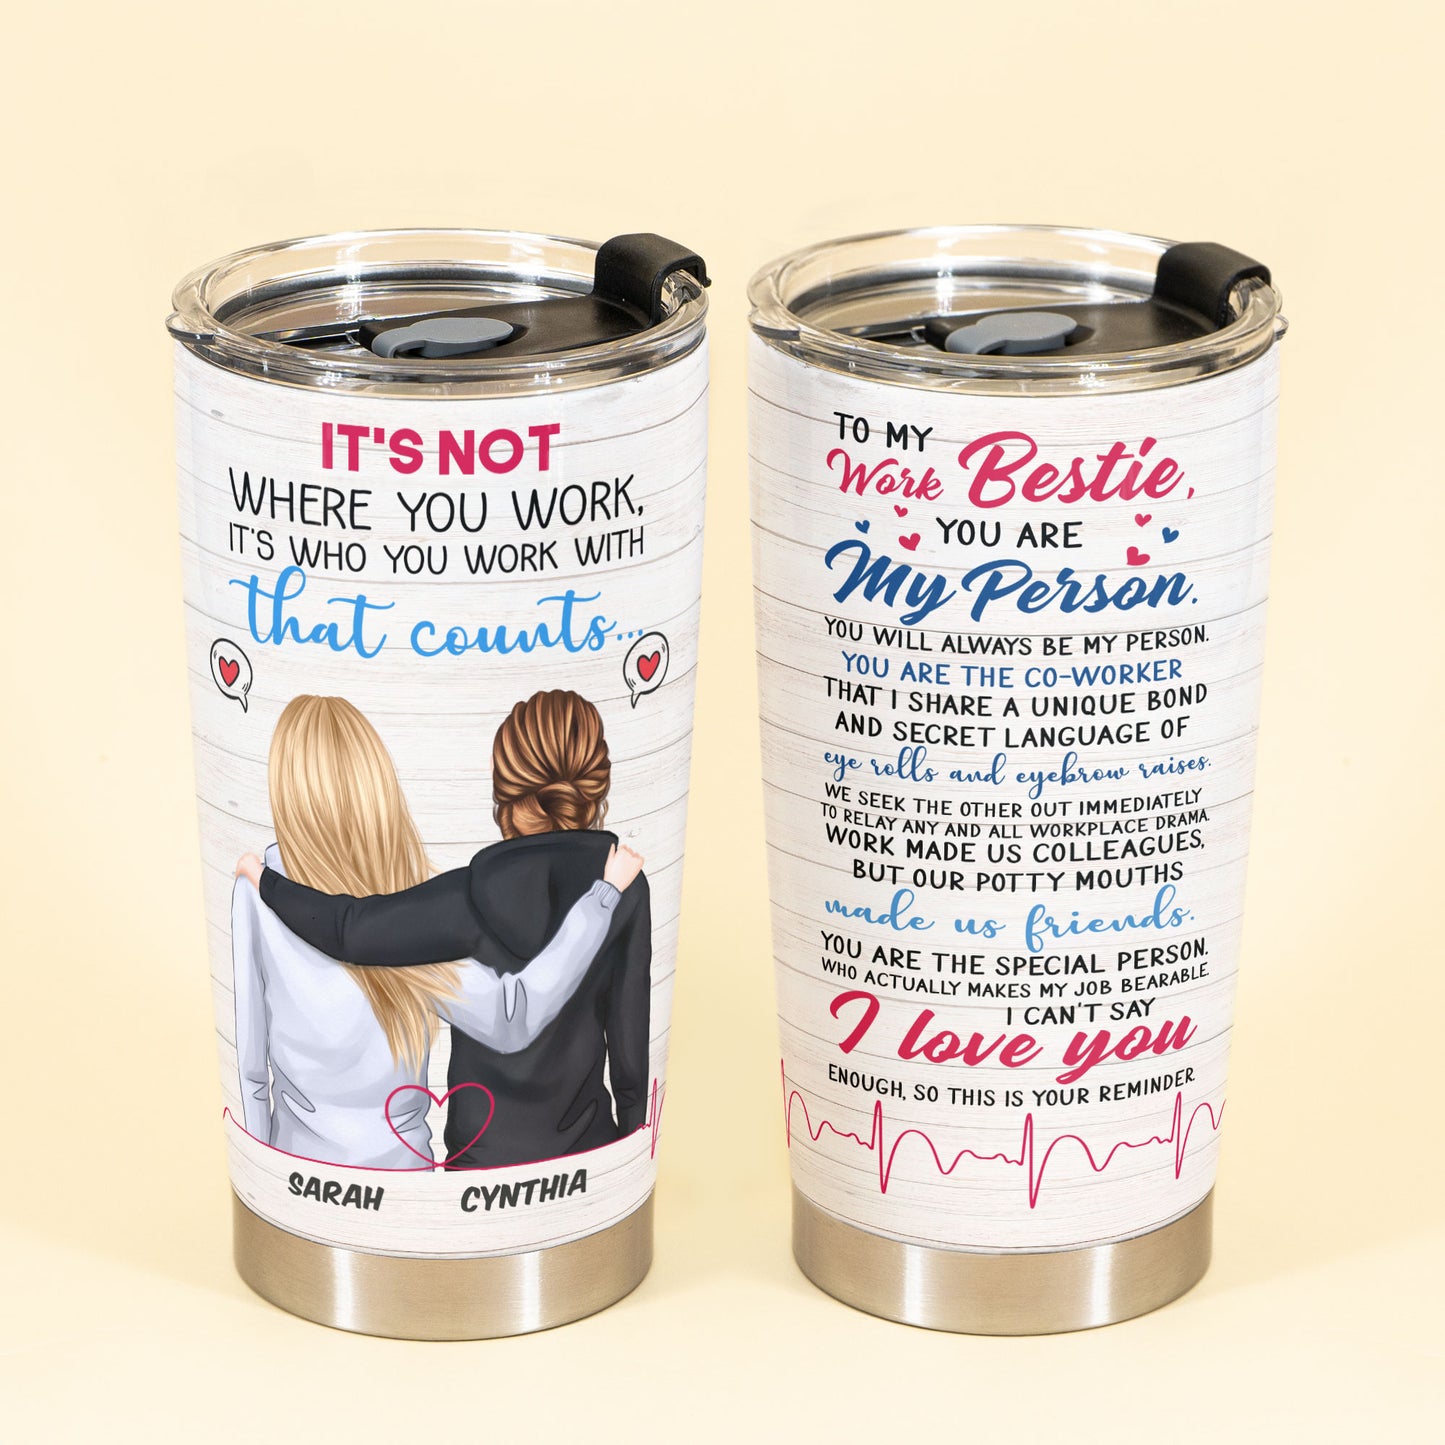 Work Bestie Our Potty Mouths Made Us Friends, Friends, Co-workers Custom Skinny Tumbler, Gift For Work Besties, Colleagues, Friends, Best Friends-Macorner